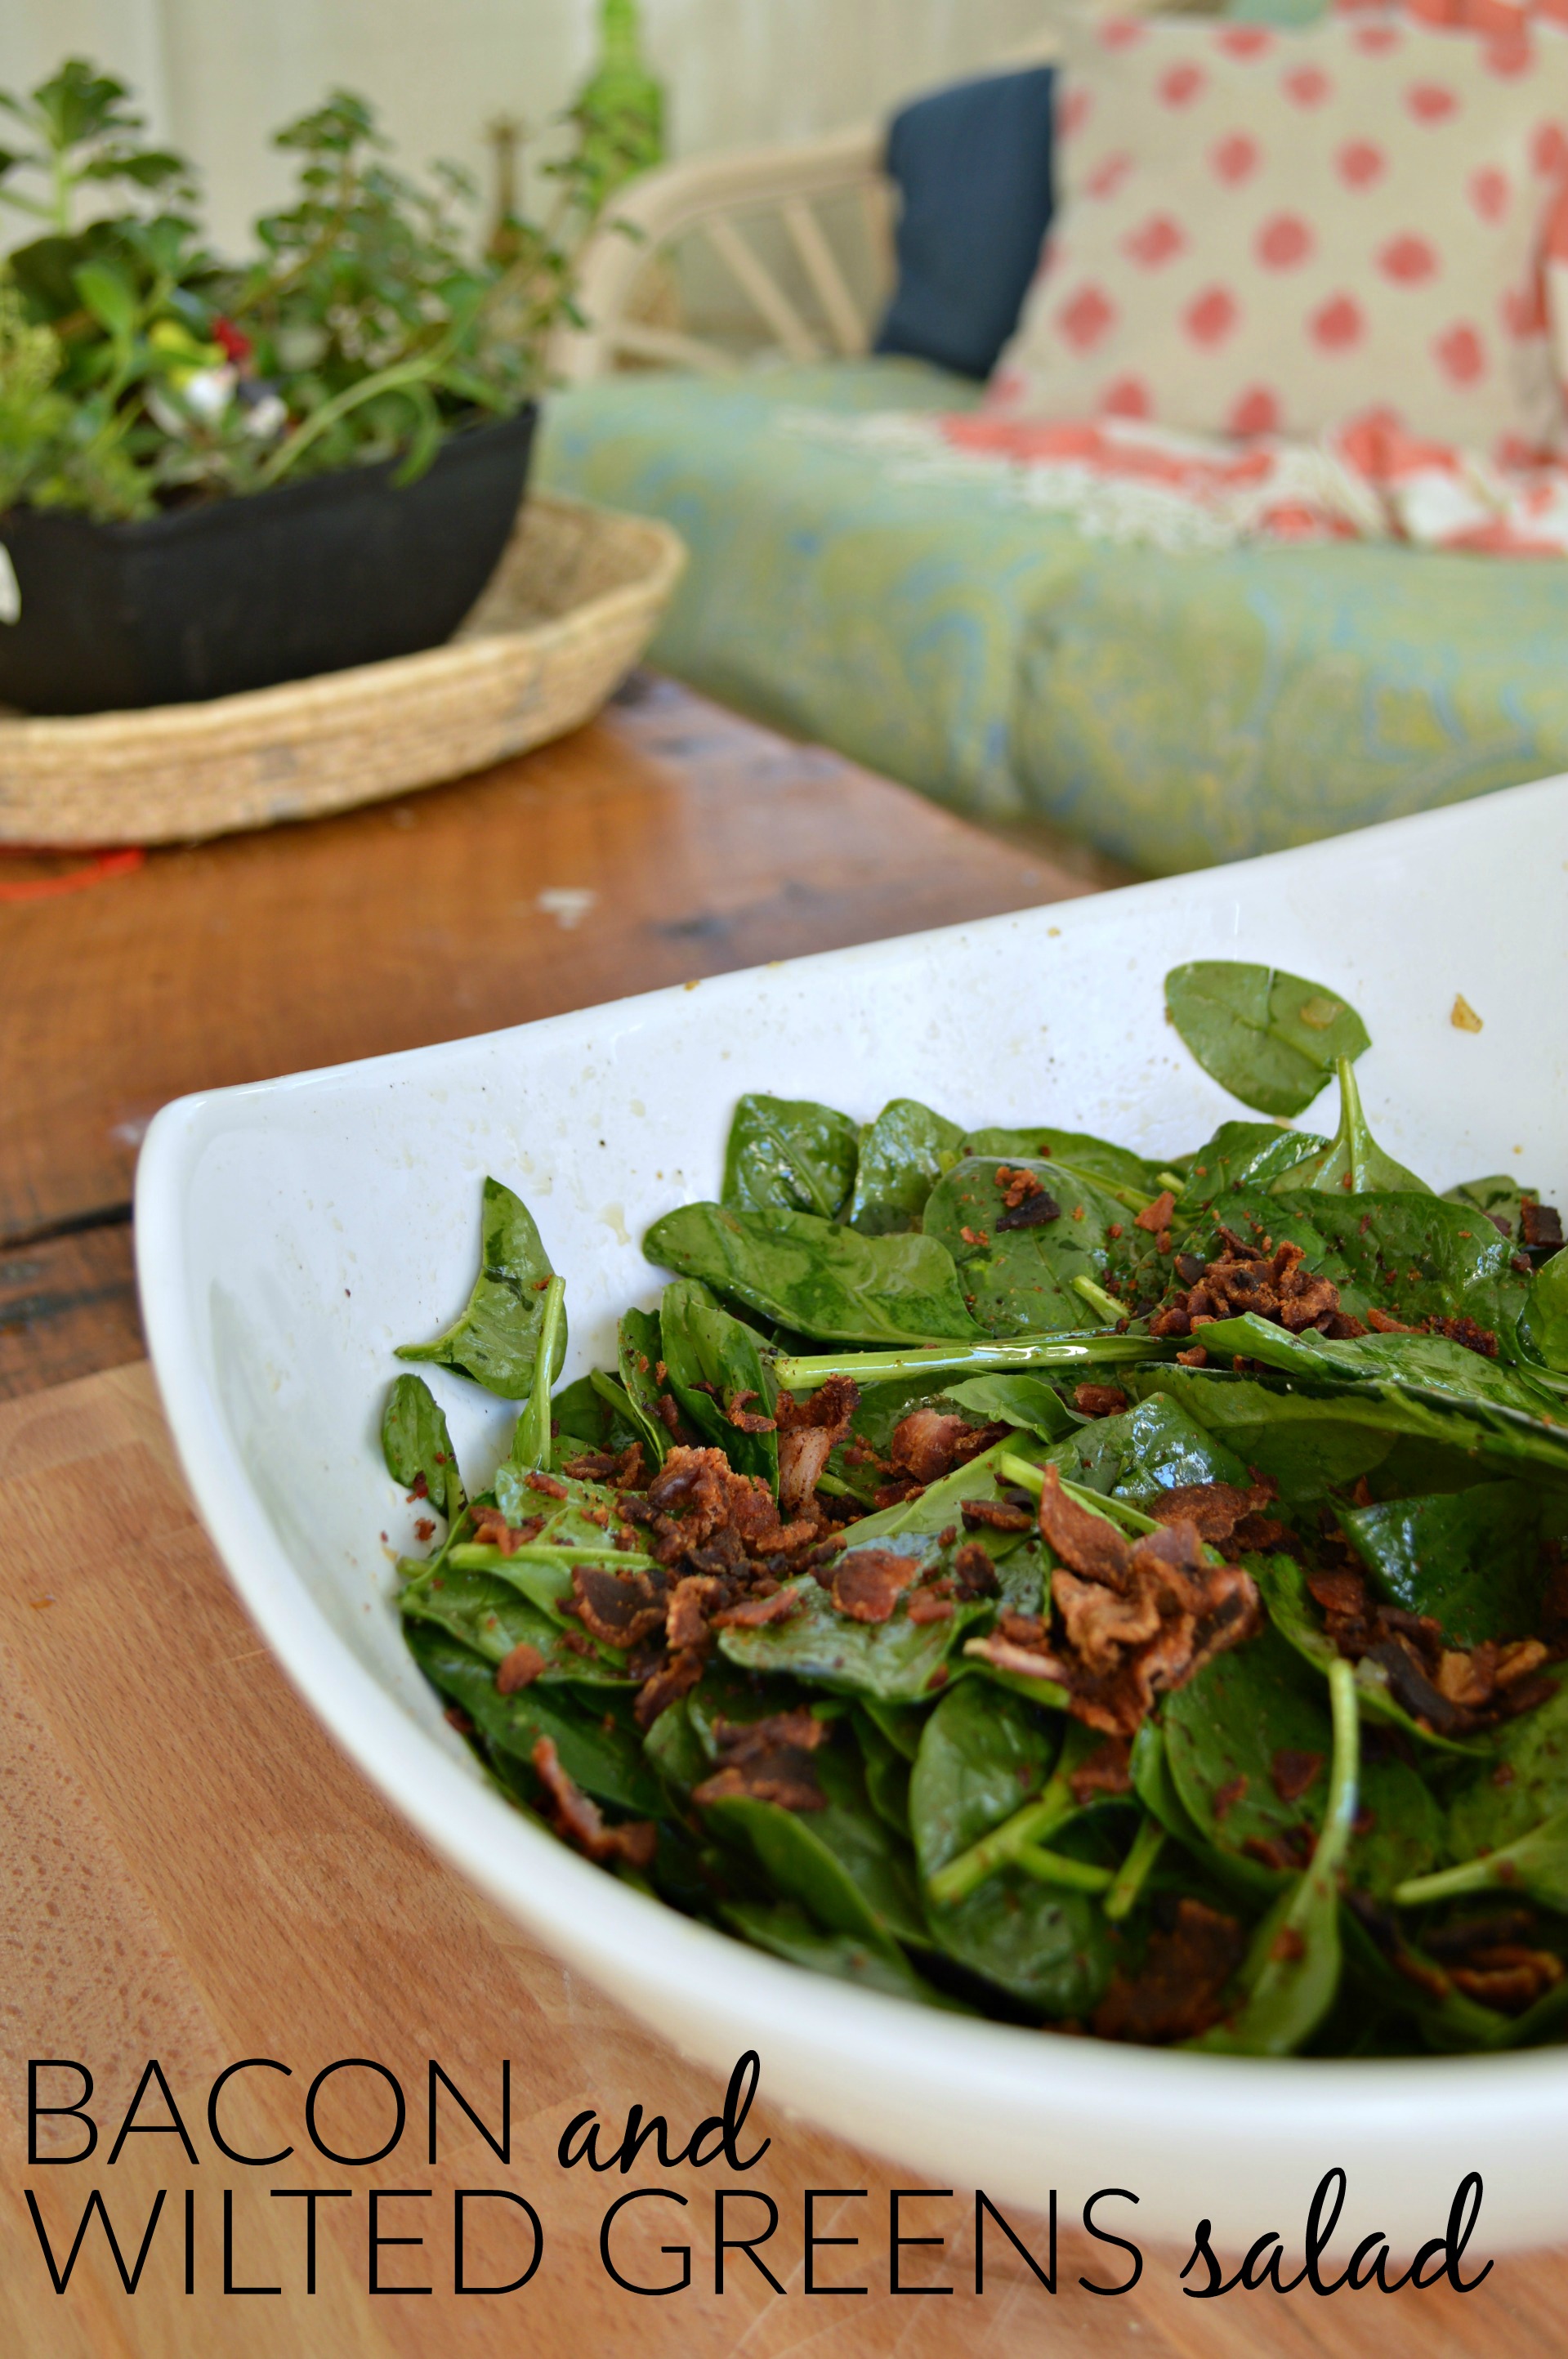 Bowl of wilted spinach salad with bacon dressing on a table near a plant